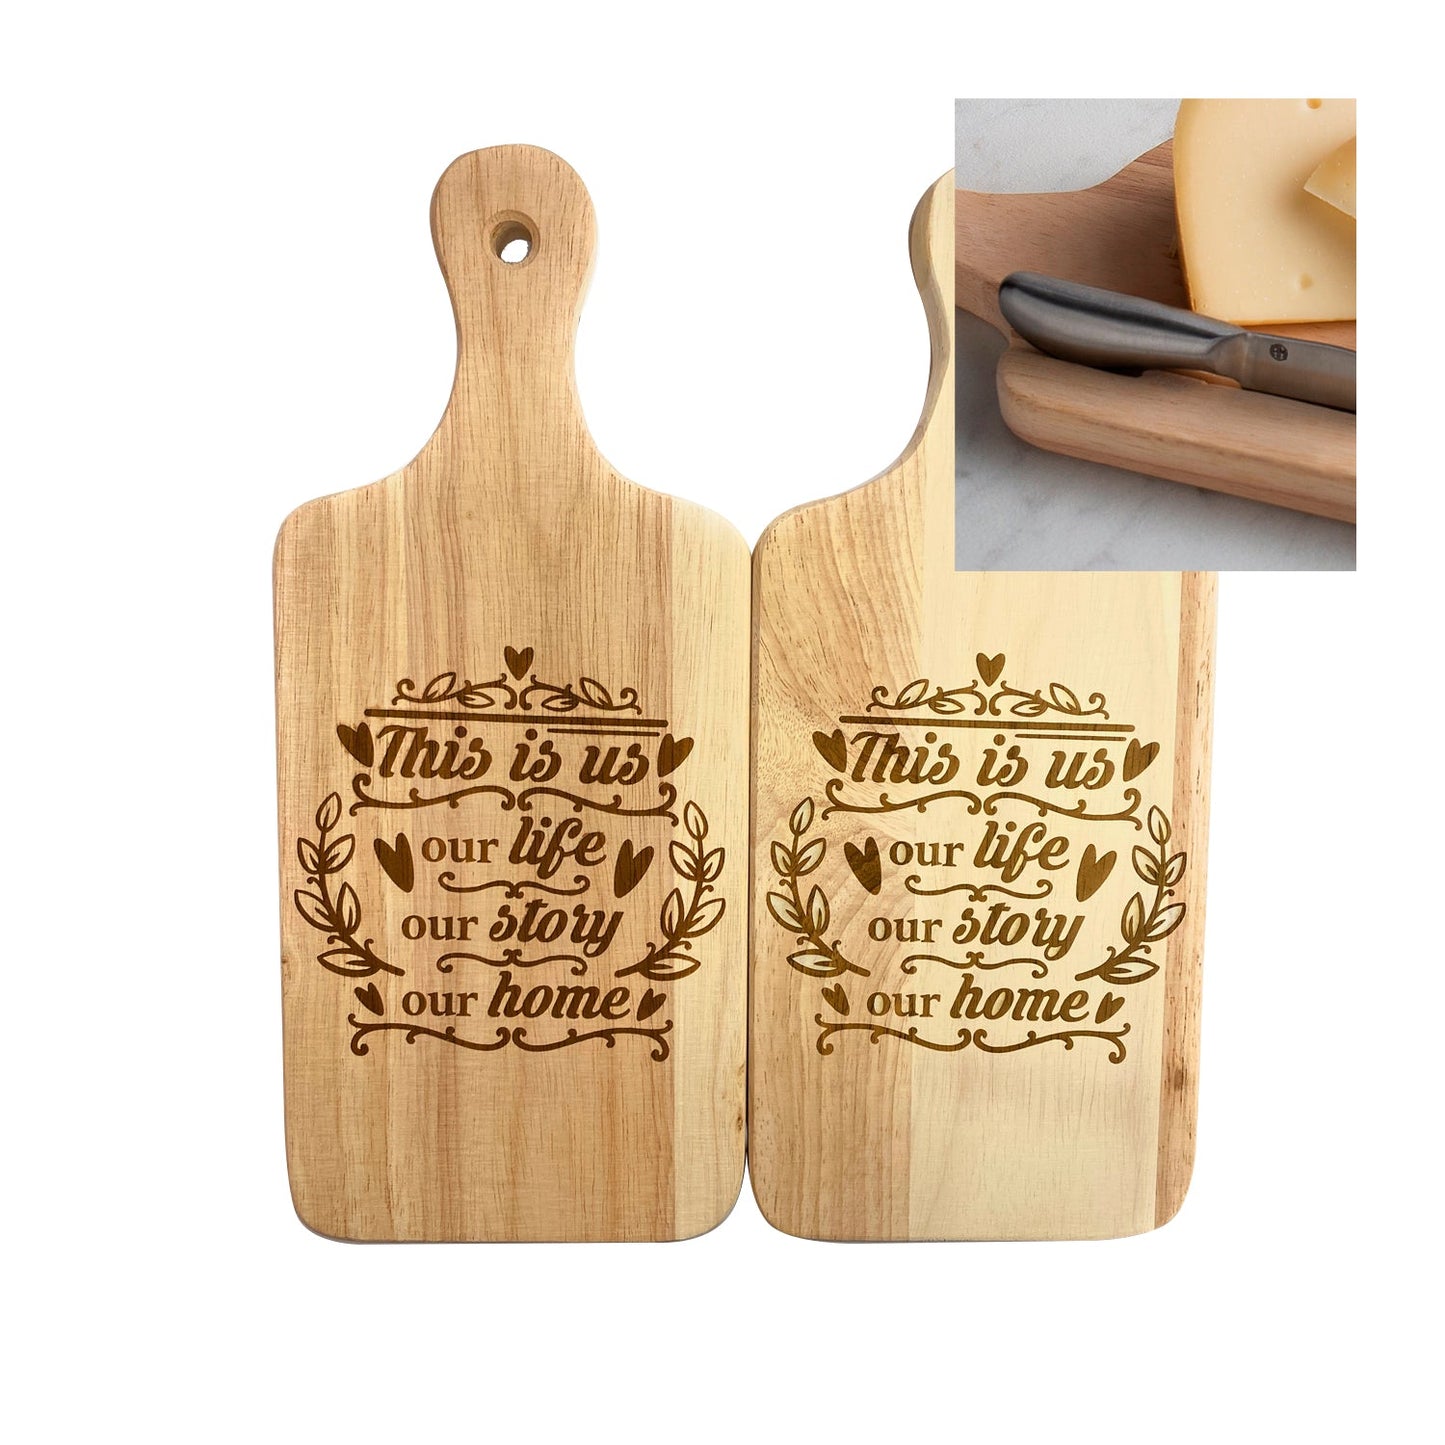 Personalized Engraved Wood Cutting Board with Handle Our Life Our Home